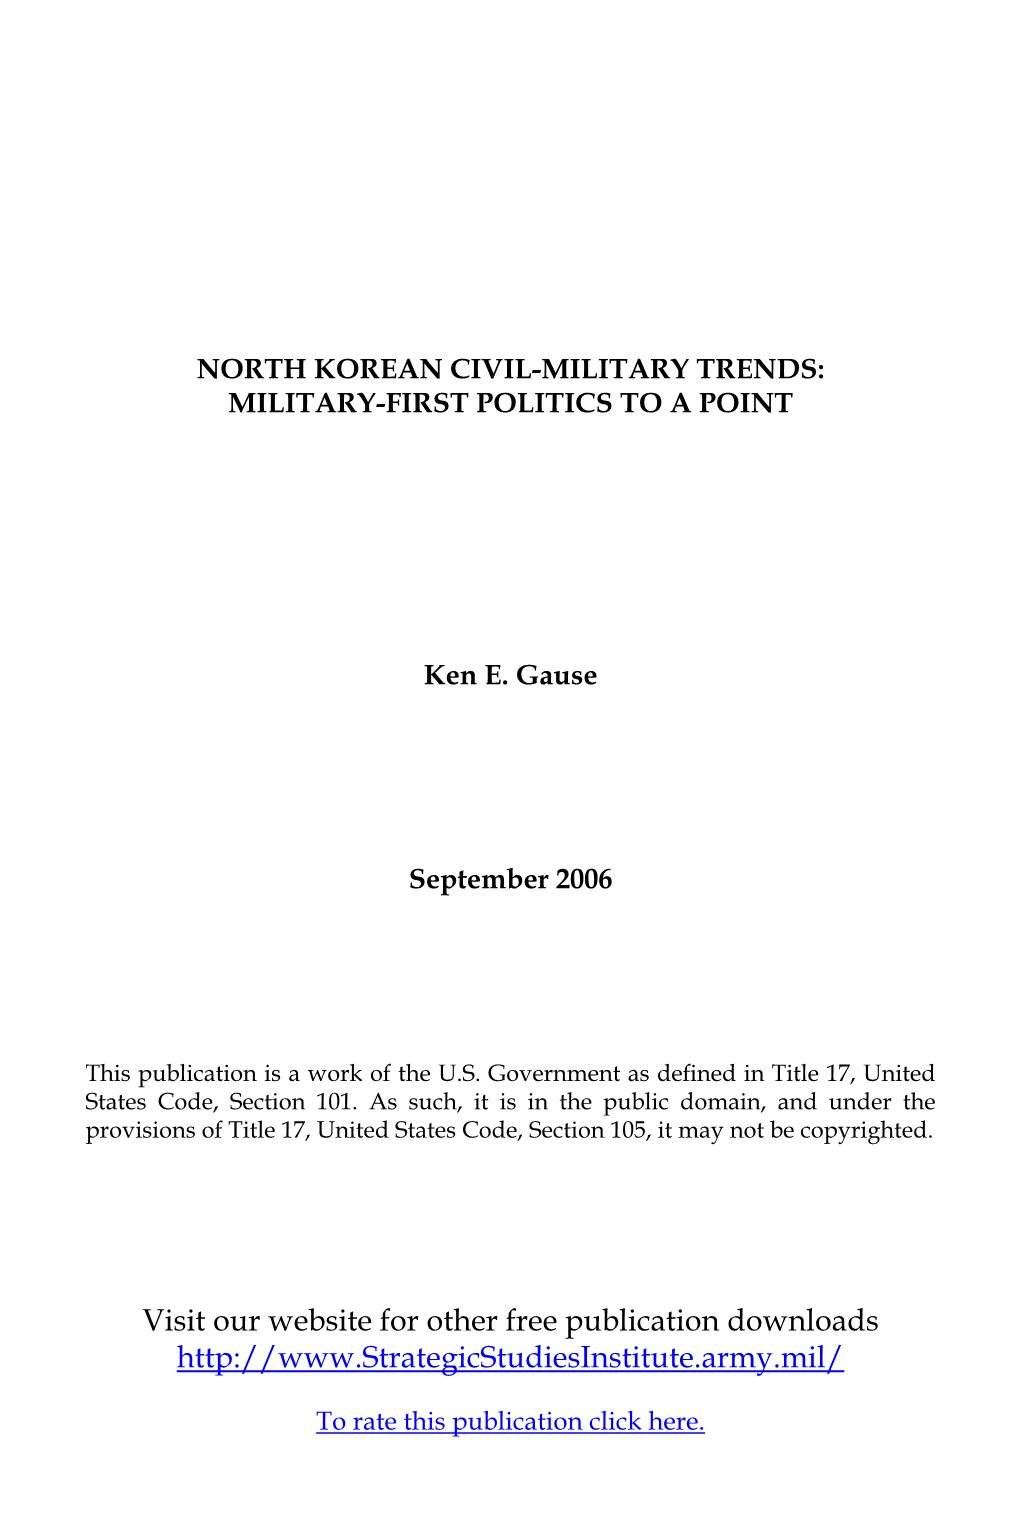 North Korean Civil-Military Trends: Military-First Politics to a Point